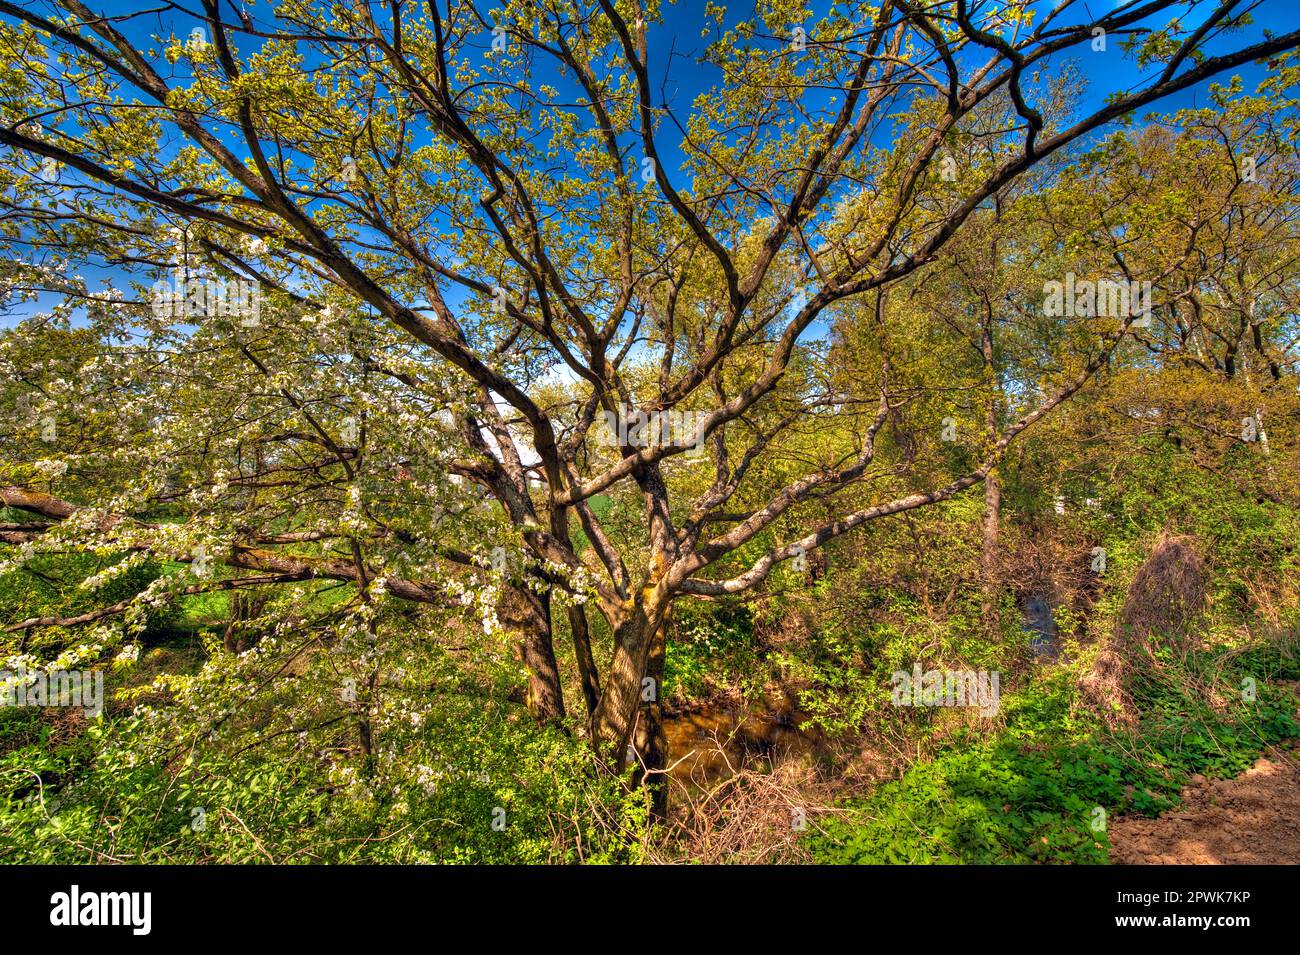 A flowering deciduous tree in spring with thicket and undergrowth under a blue sky with fine weather Stock Photo